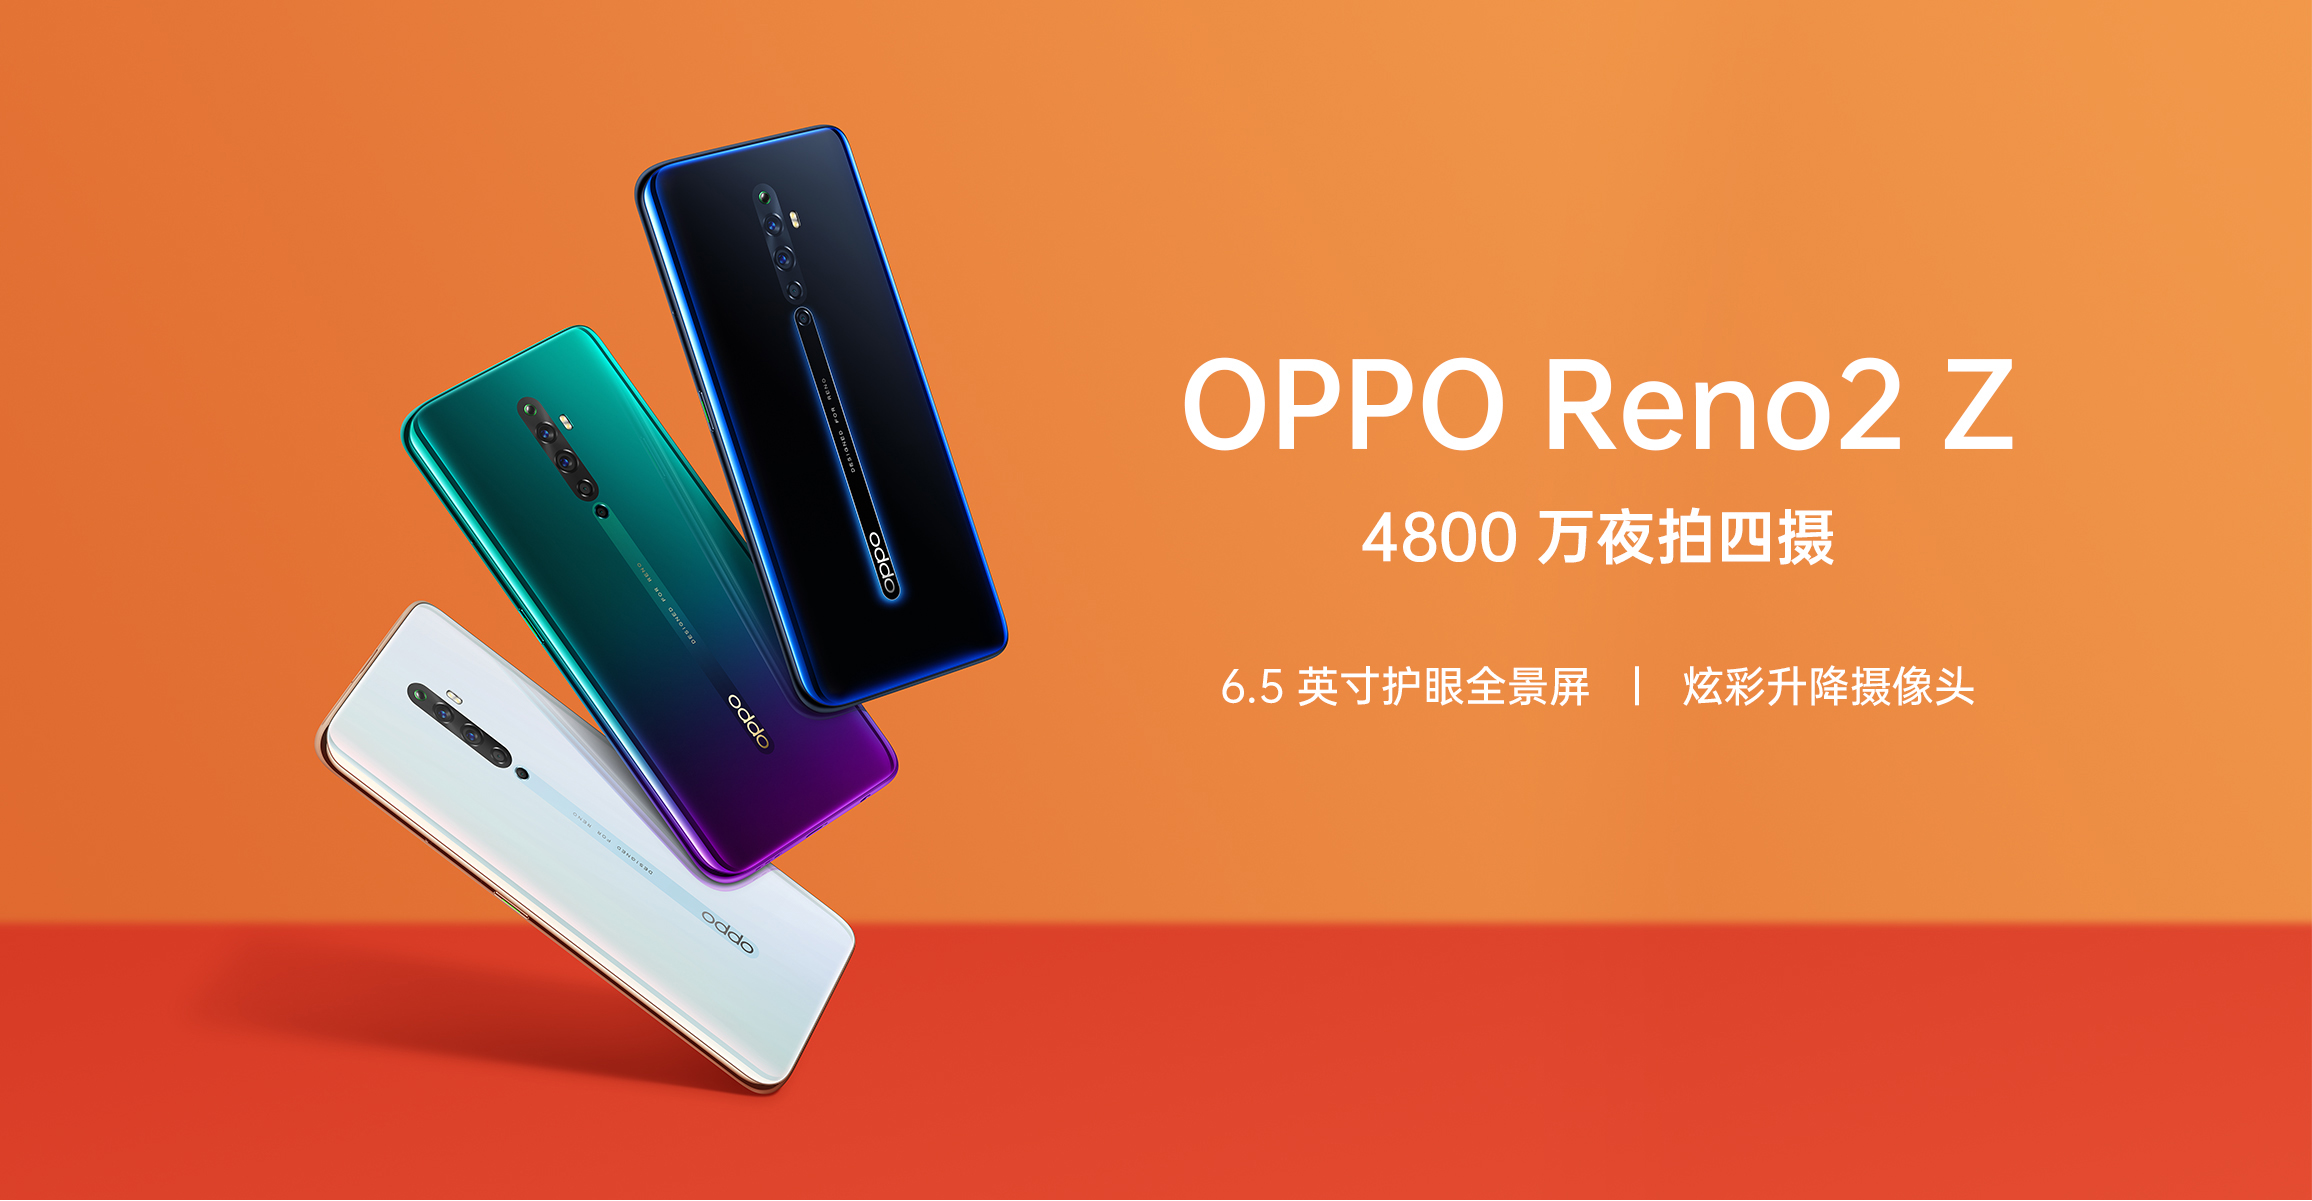 OPPO Reno2 Z goes official discreetly in China for 2,499 Yuan (~$353) -  Gizmochina